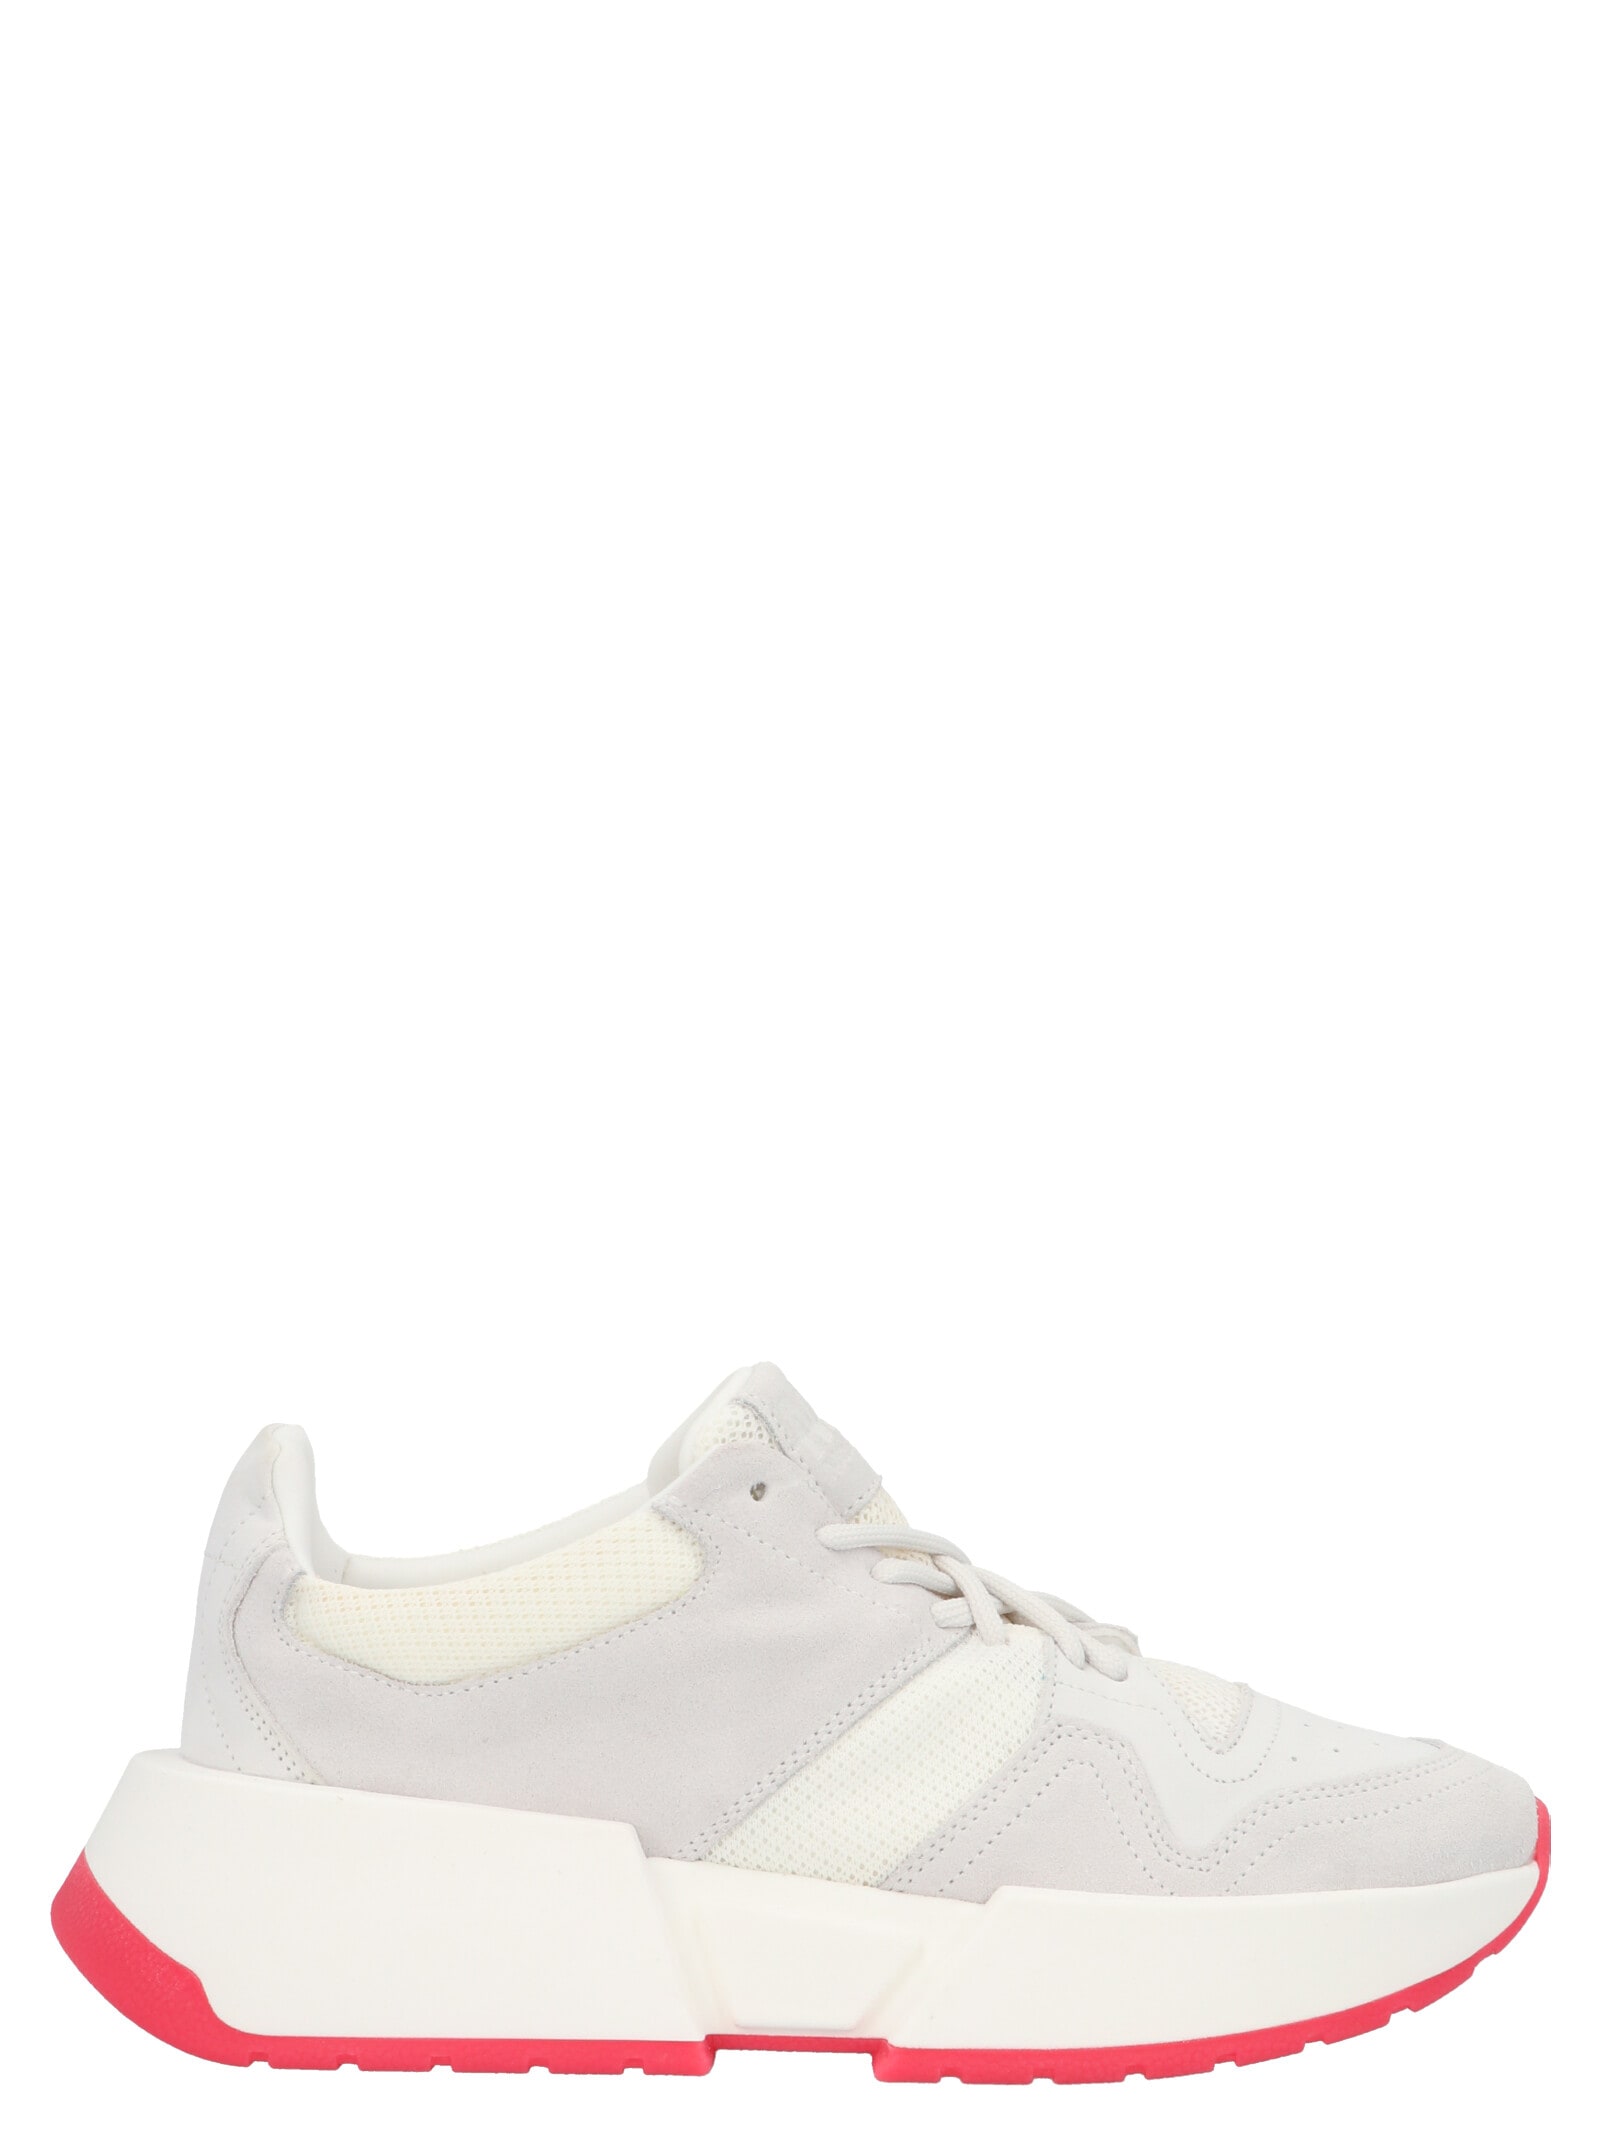 Mm6 Maison Margiela Carry Over Shoes In White